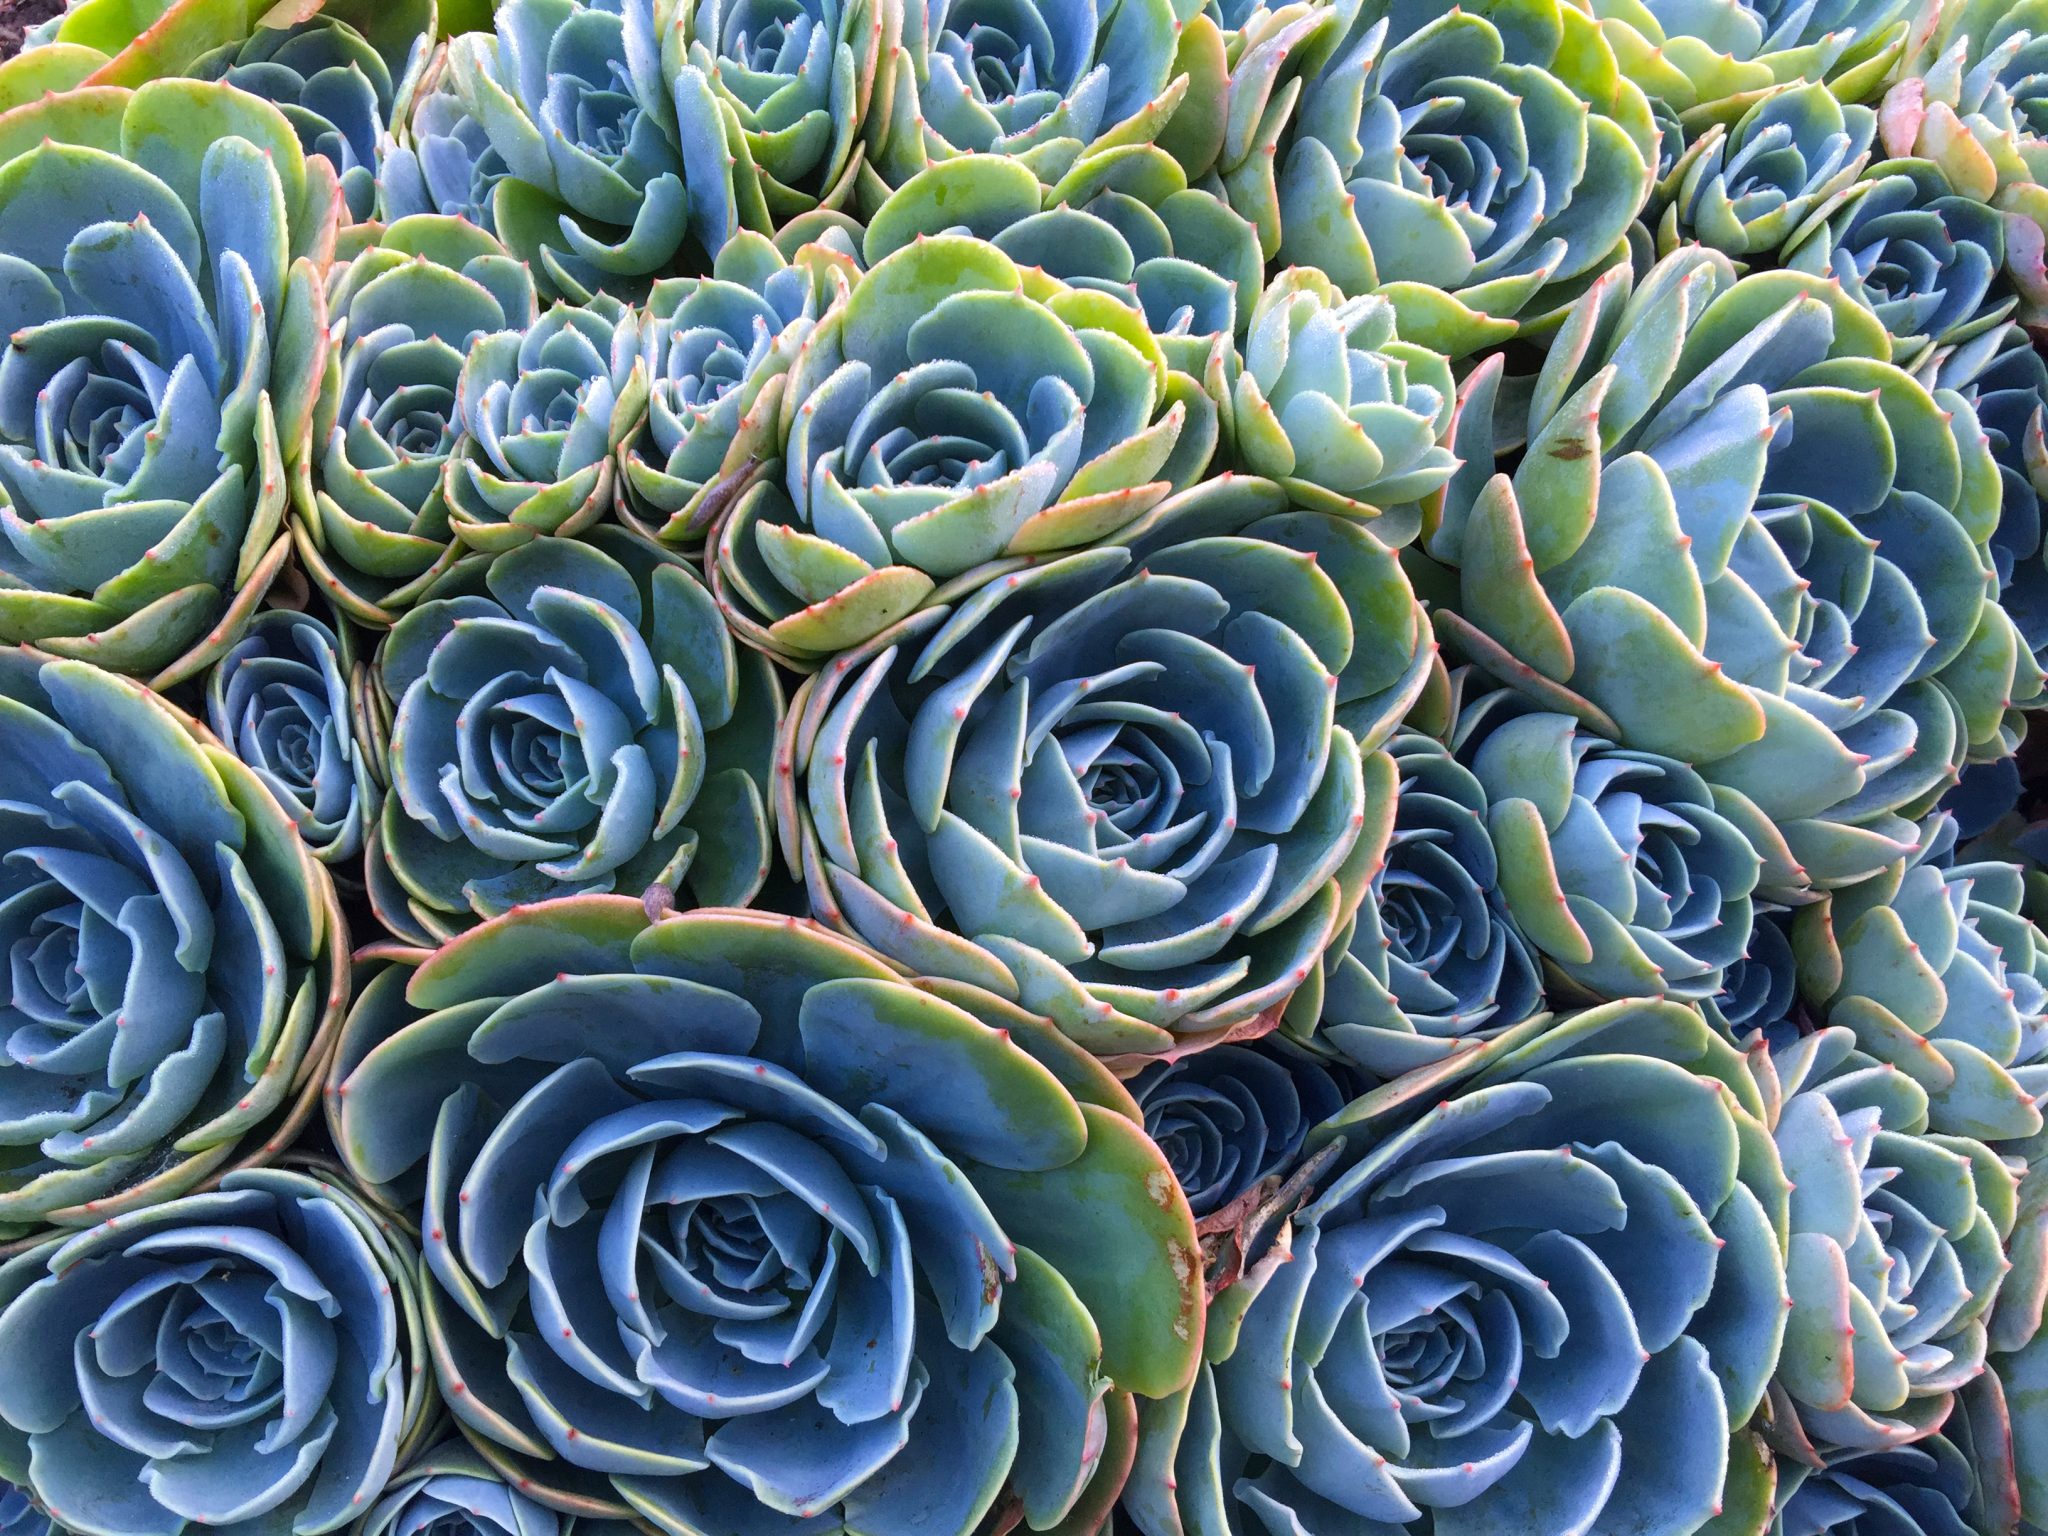 Group Of Blue-Green Succulents